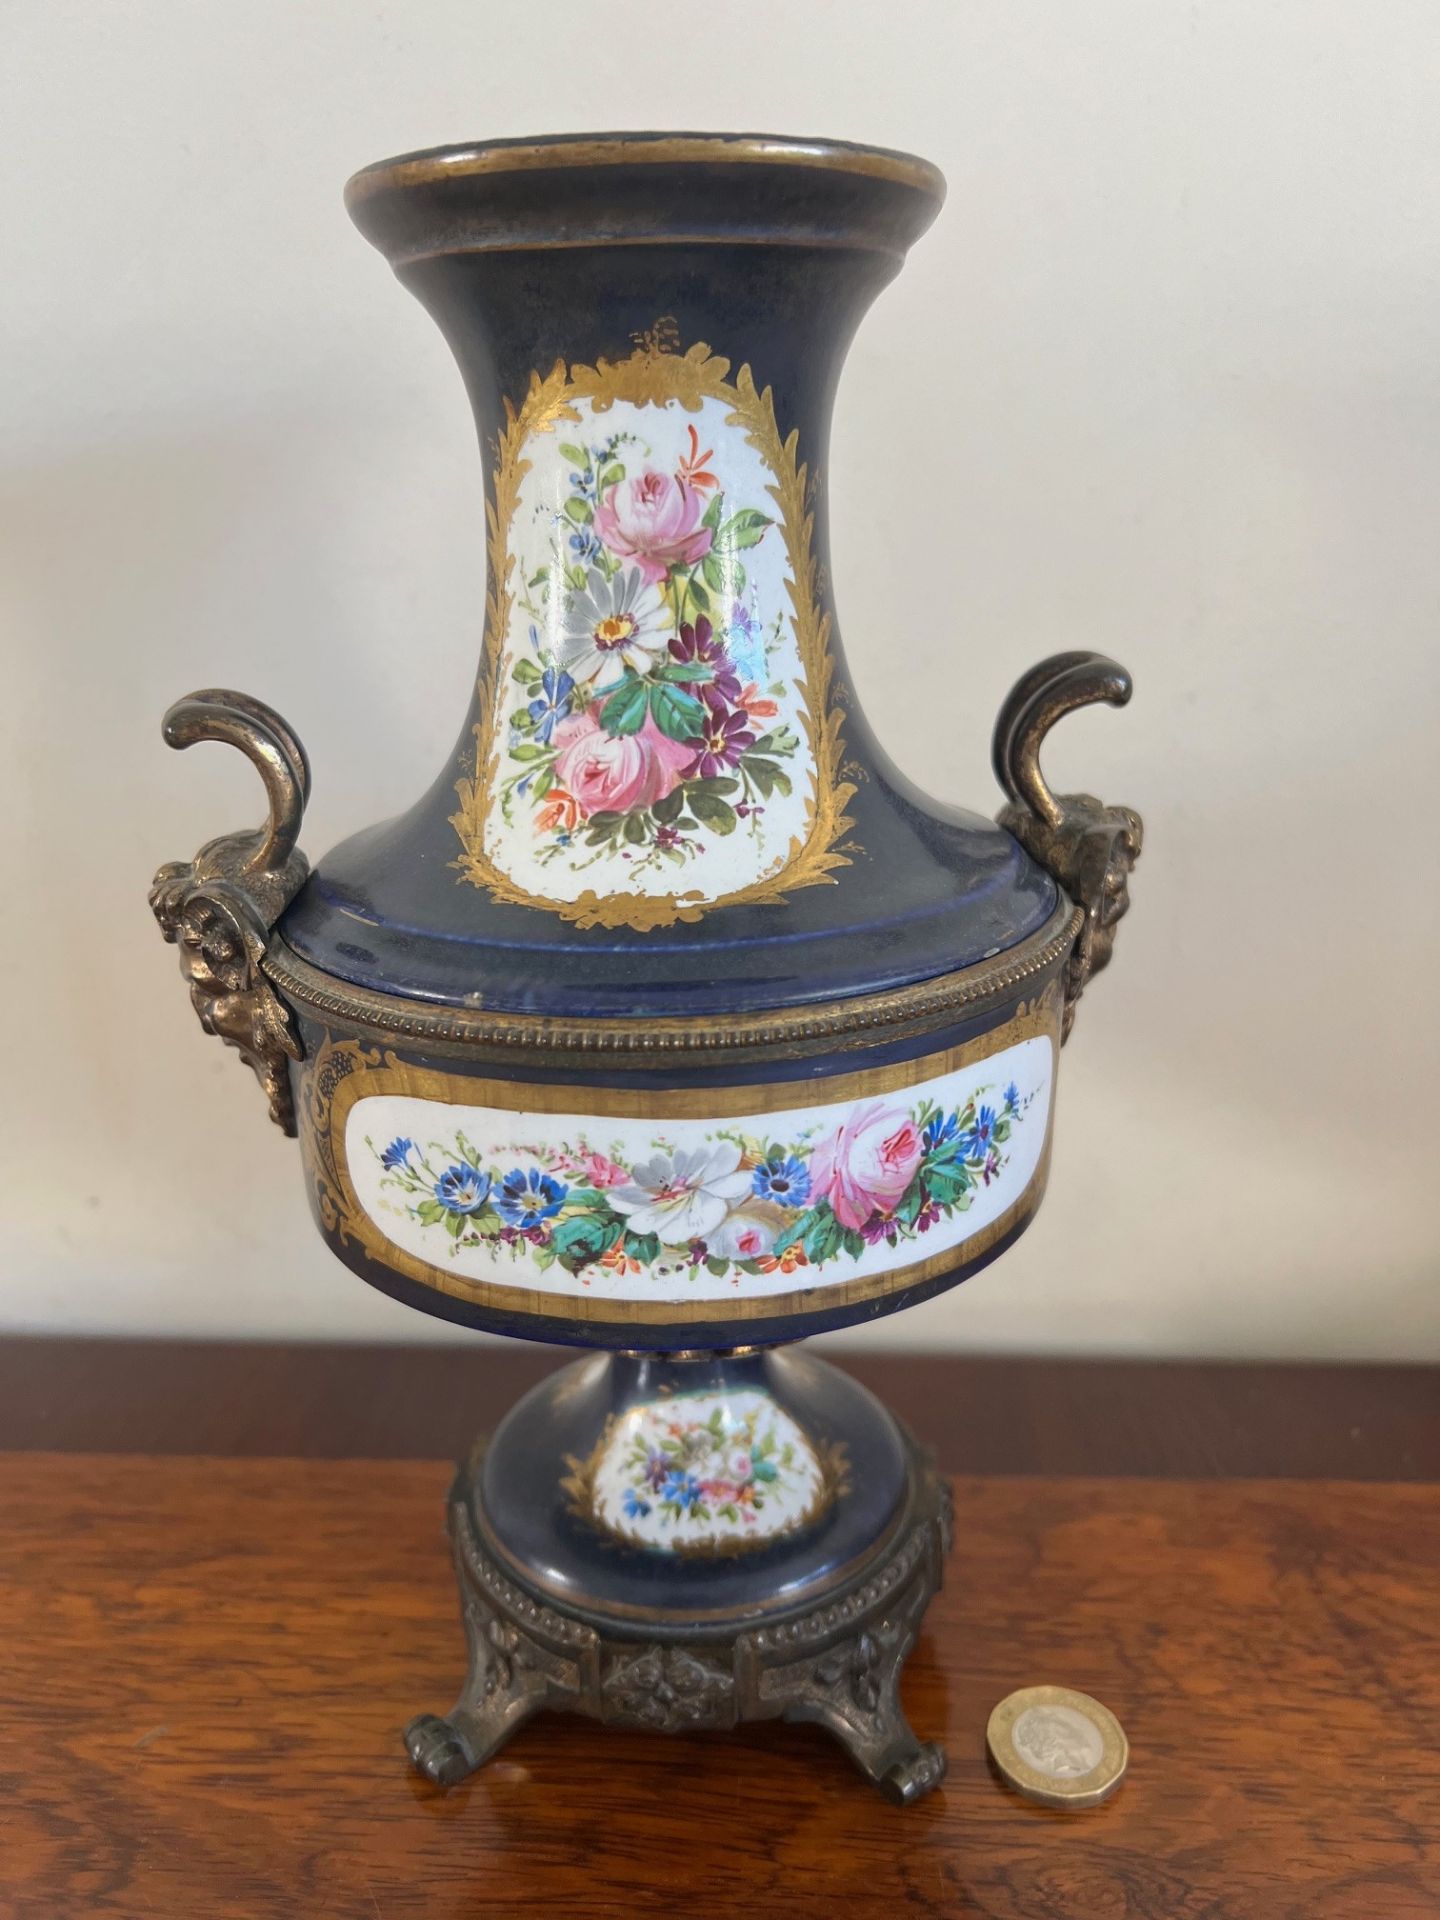 CONTINENTAL POTTERY VASE WITH ORMOLU MOUNTS DEPICTING LOUIS XVI OF FRANCE, HAND DECORATED PANELS - Image 4 of 6